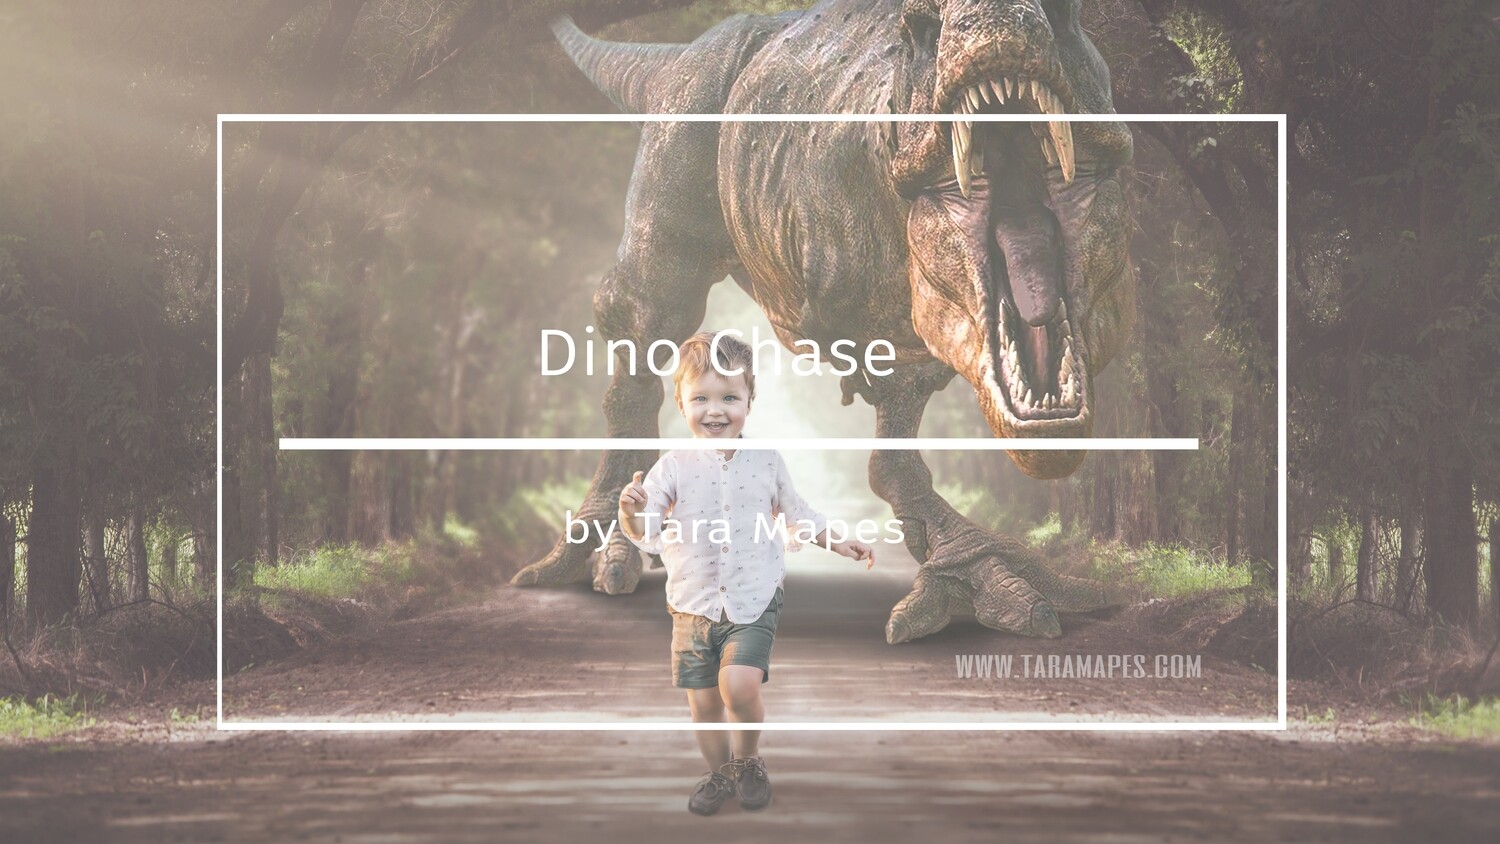 Photoshop Tutorial on How To Extract and Blend Your Subject into Dino Chase Background in Photoshop by Tara Mapes